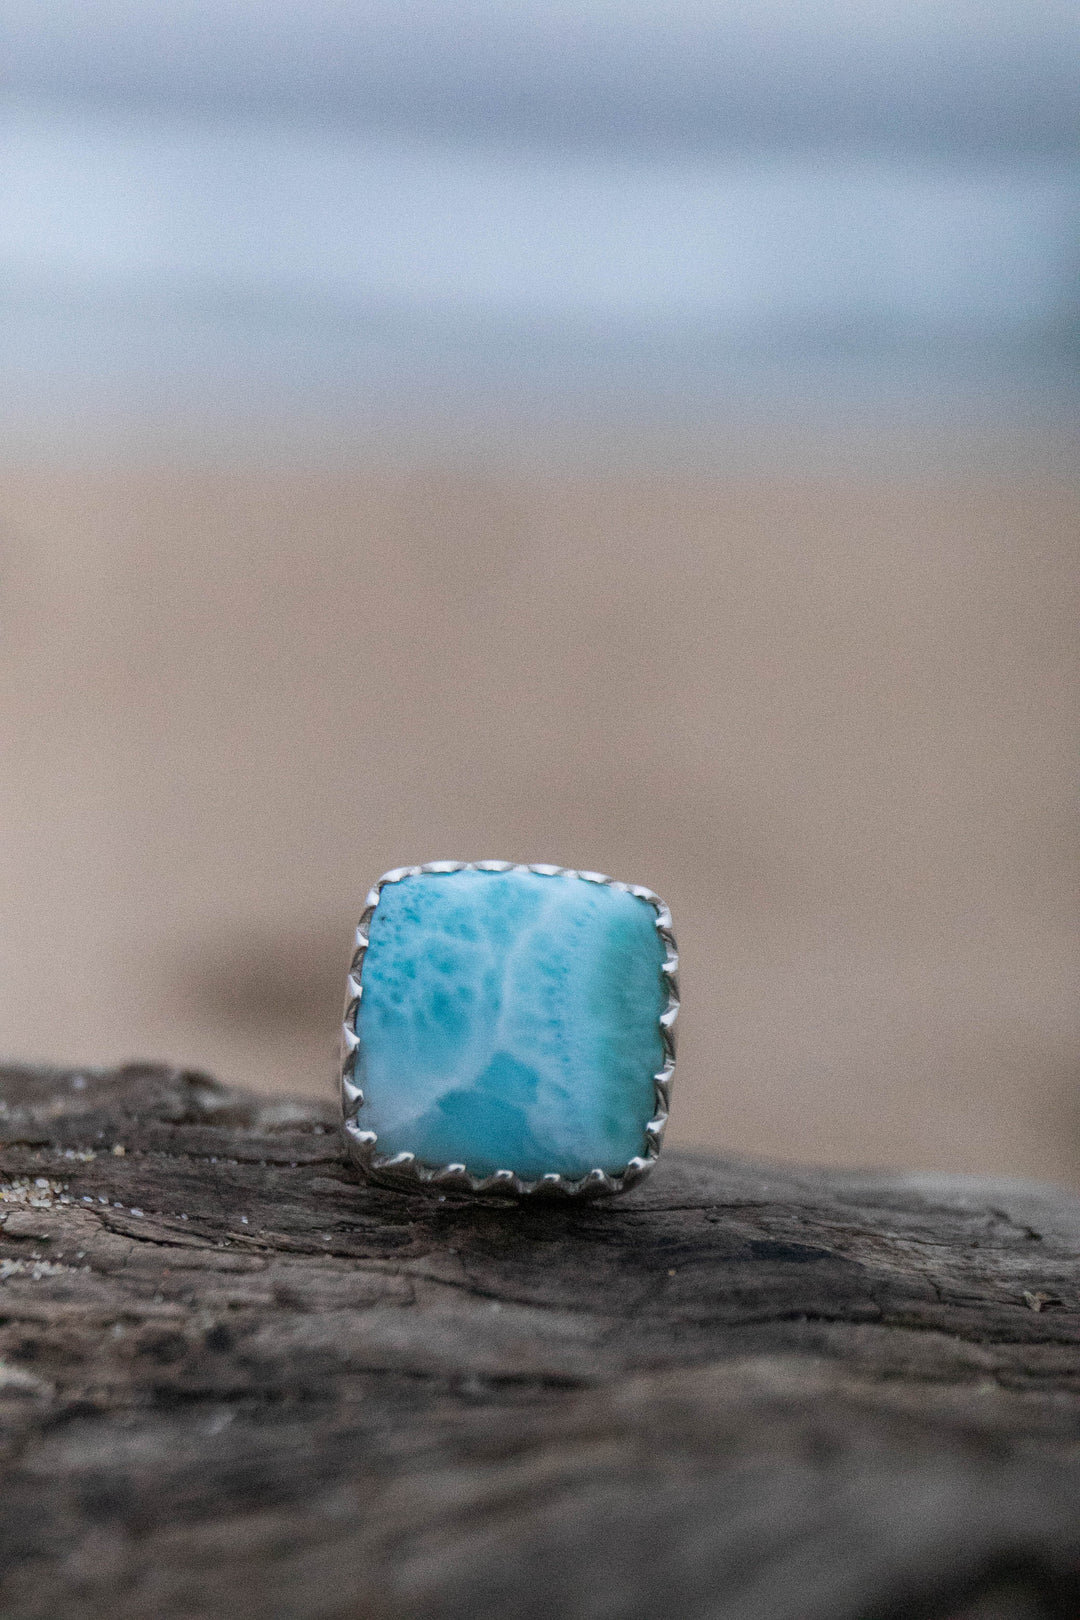 Larimar Ring in Sterling Silver Setting - Size 7.5 US